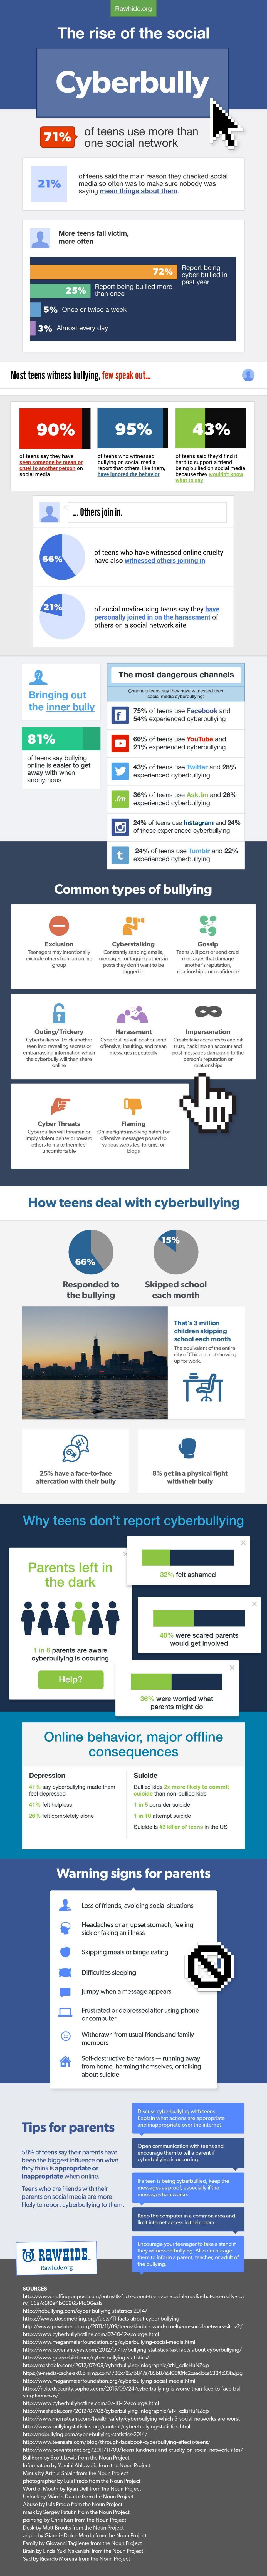 The Rise of Social Media Cyberbullying Infographic